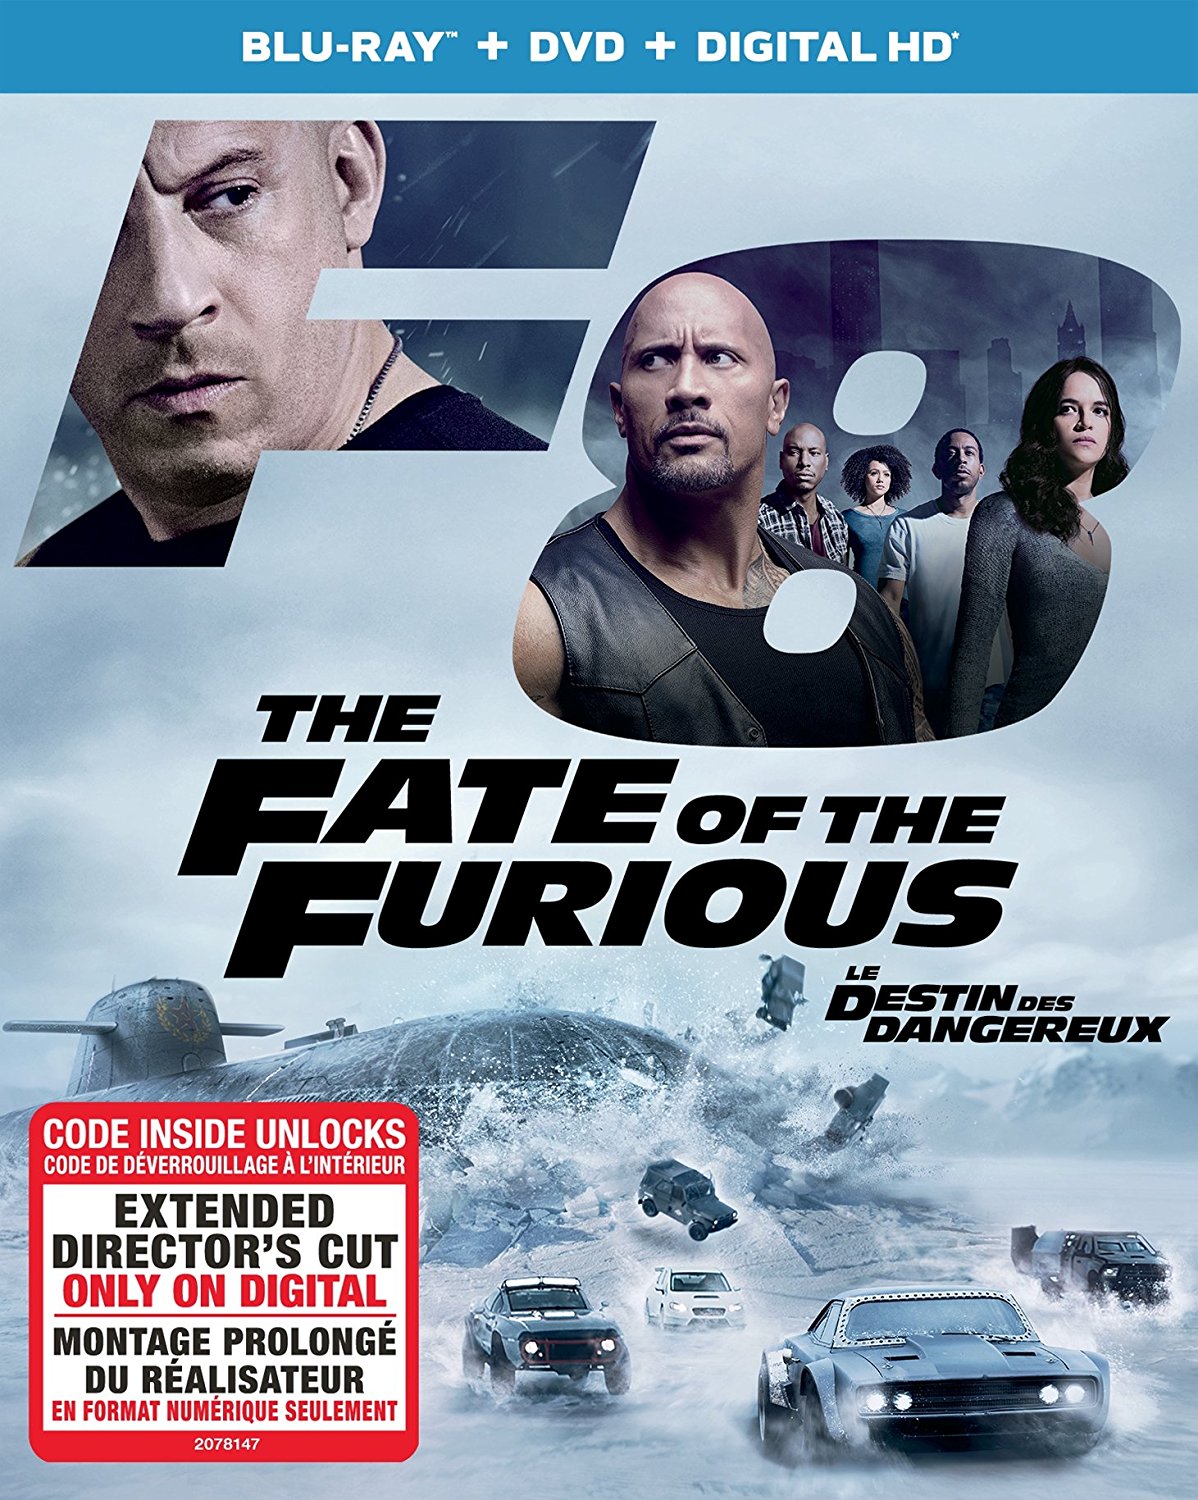 The Fate of the Furious is now available on DVD